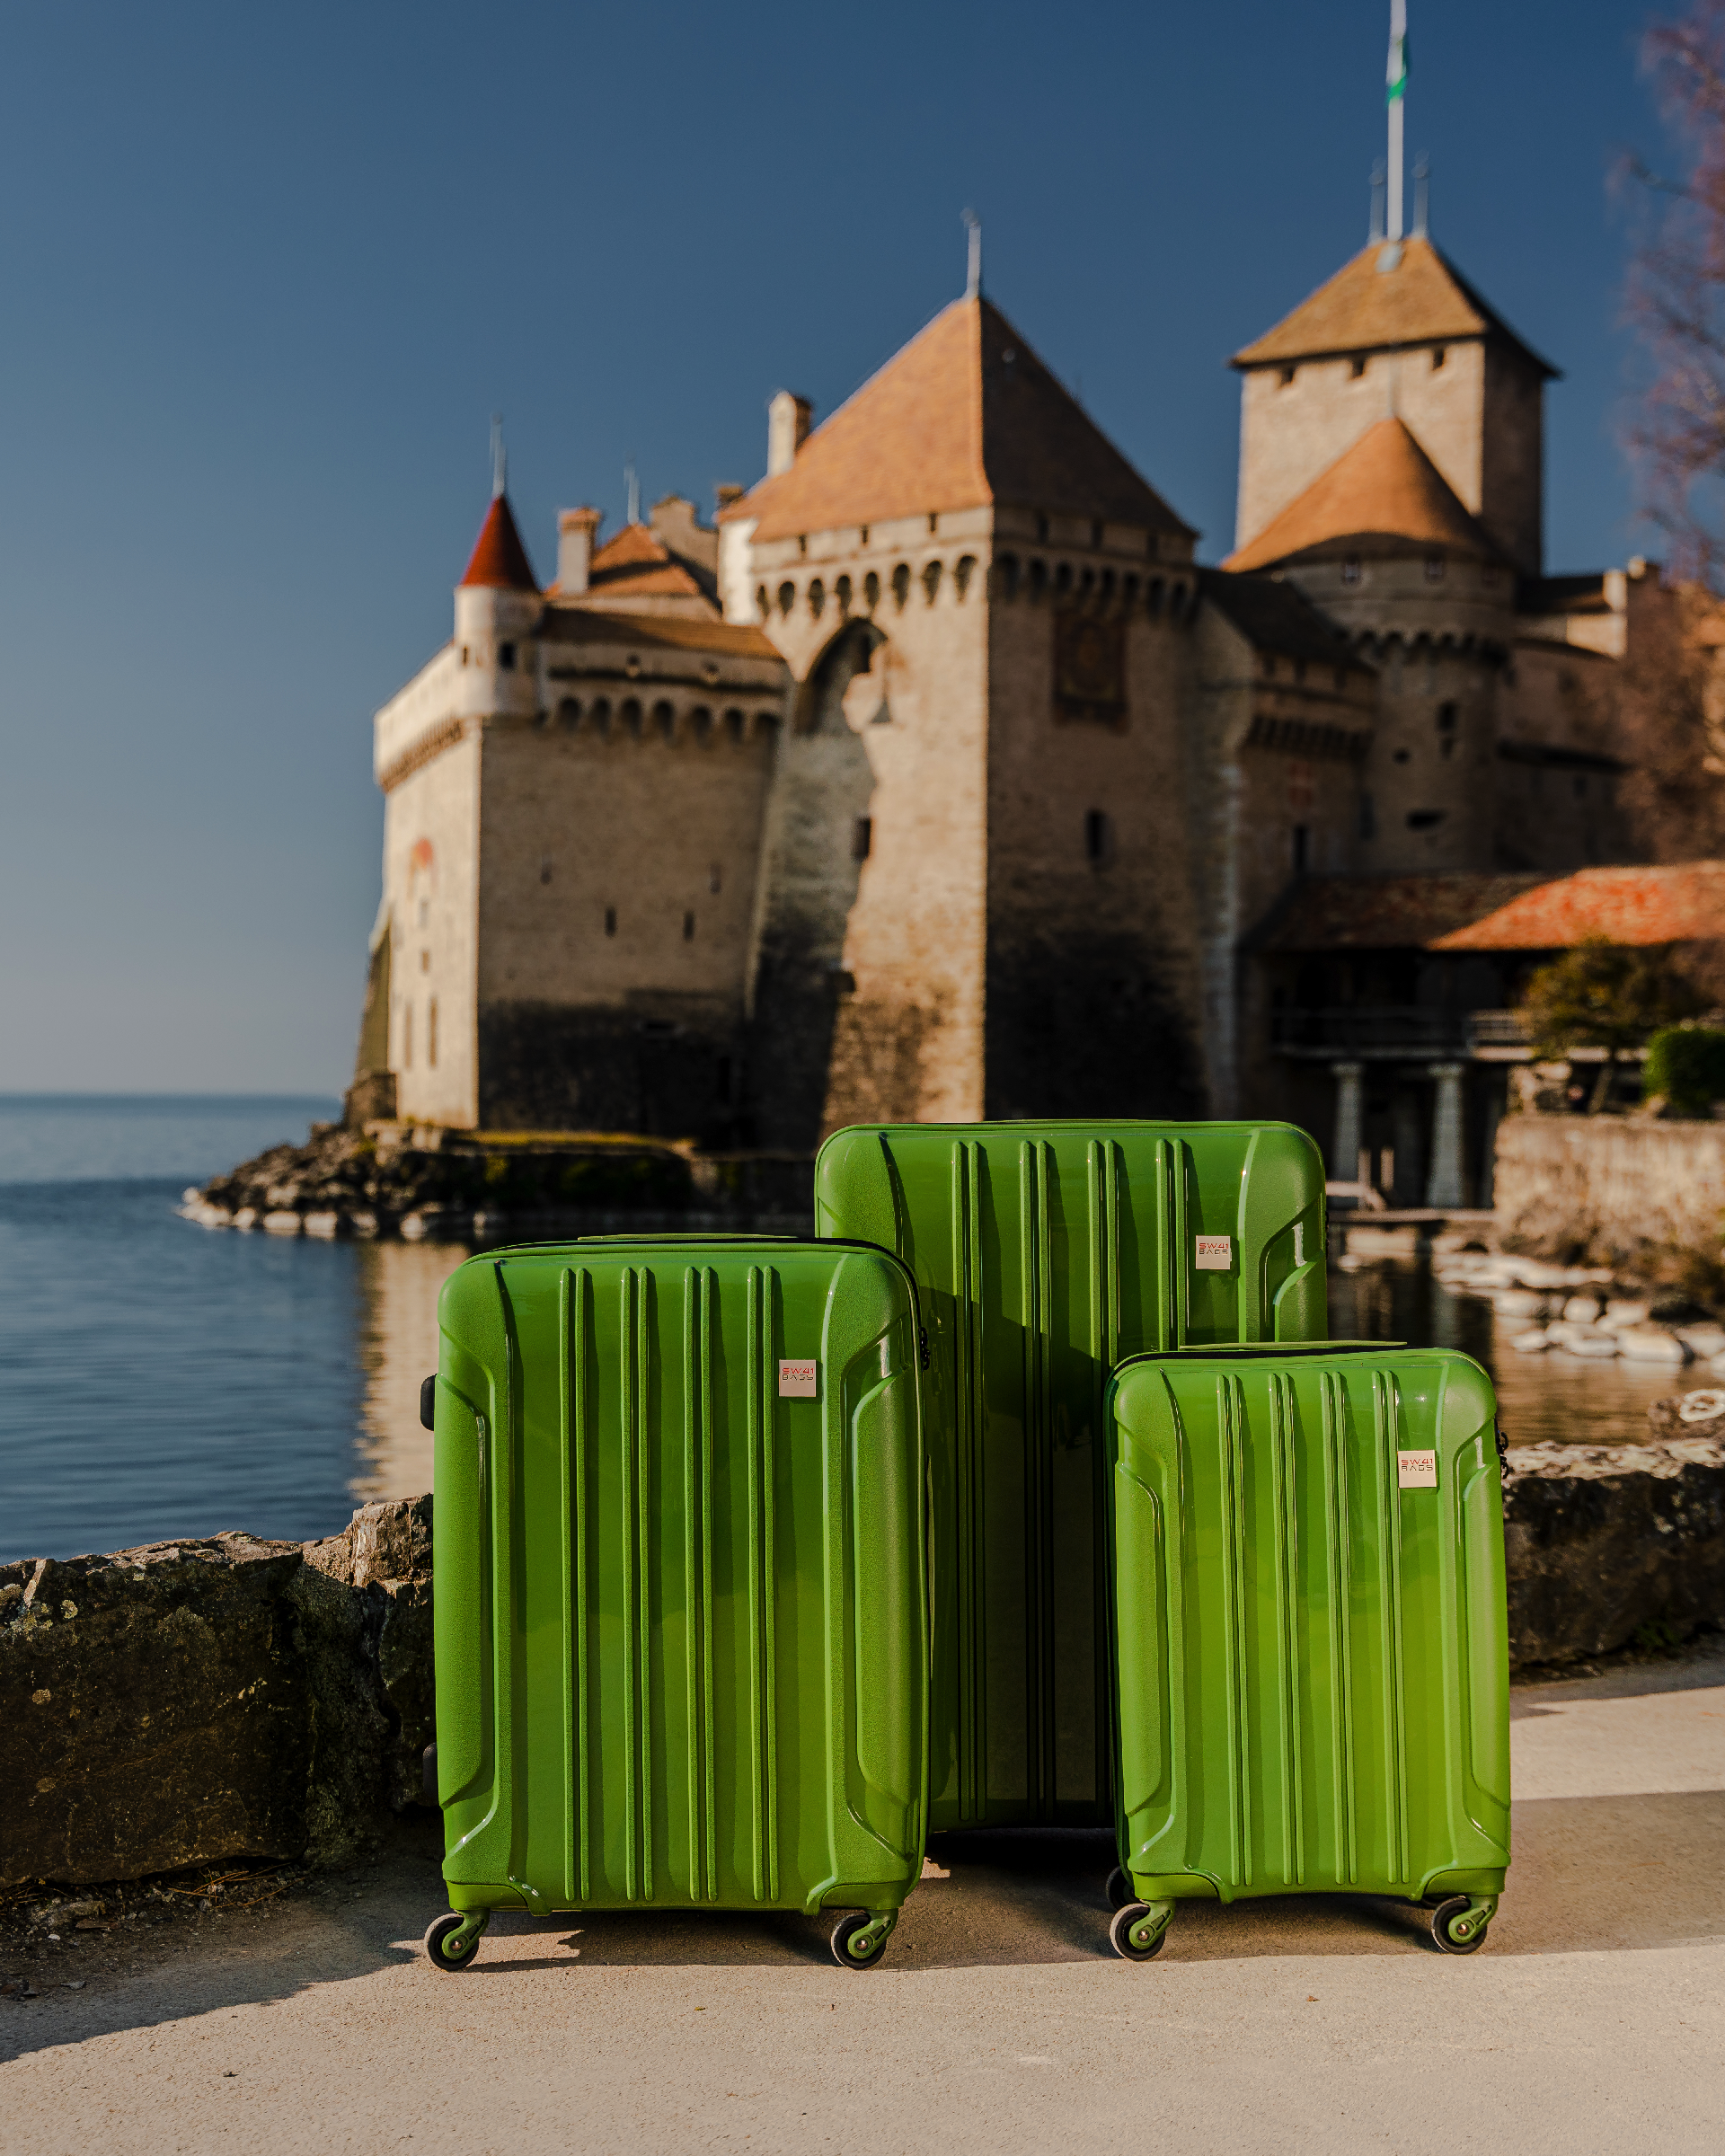 Tourist - 3 Koffer Set (S, M, L) - Swissbags: Travel Bags, Luggage,  Accessories - Vouvry, Switzerland - Travel Bags, Luggage, Accessories -  Vouvry, Switzerland